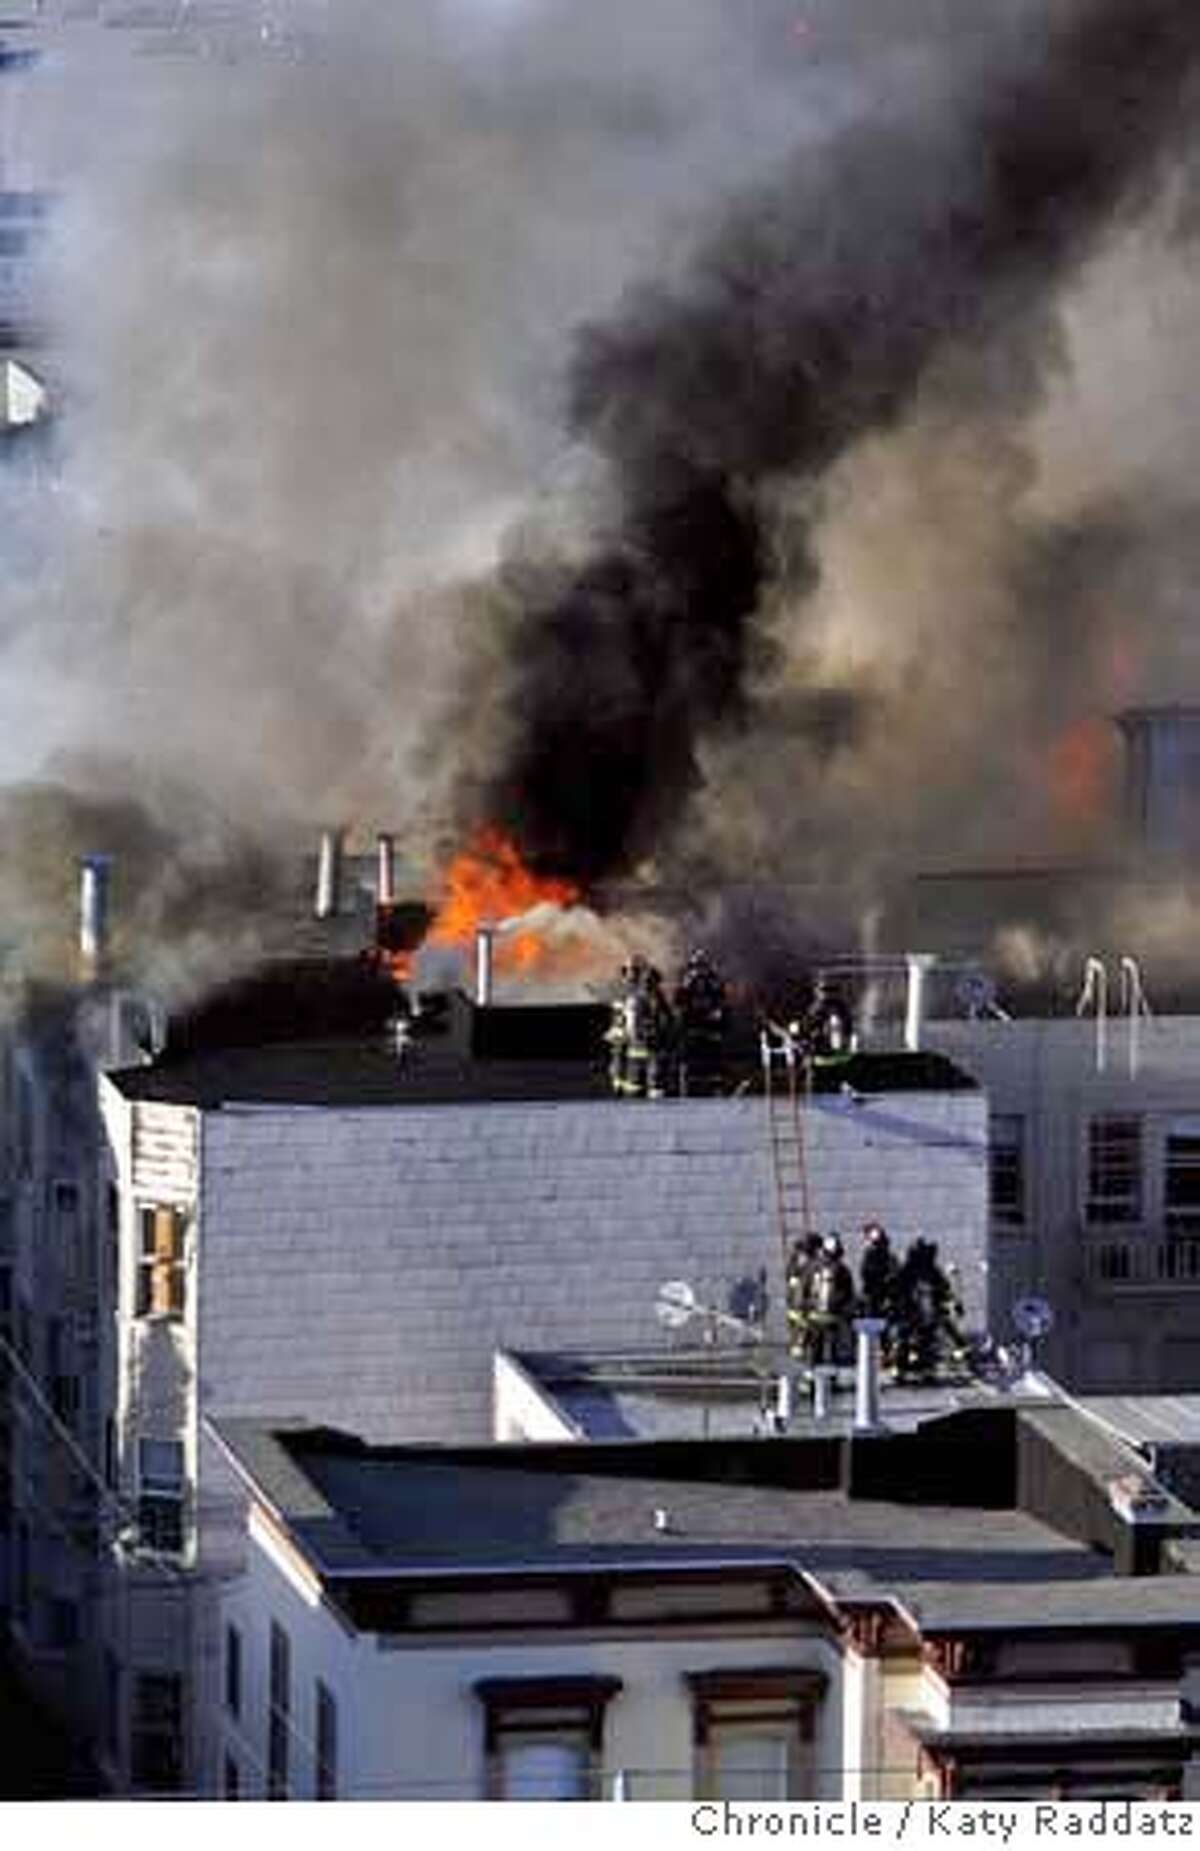 A fire that is centered at 1470 Valencia St. consumes many buildings in the 1400 block, including the Dovre Club, in San Francisco, Calif. on Monday March 17, 2008. Photo by Katy Raddatz / San Francisco Chronicle